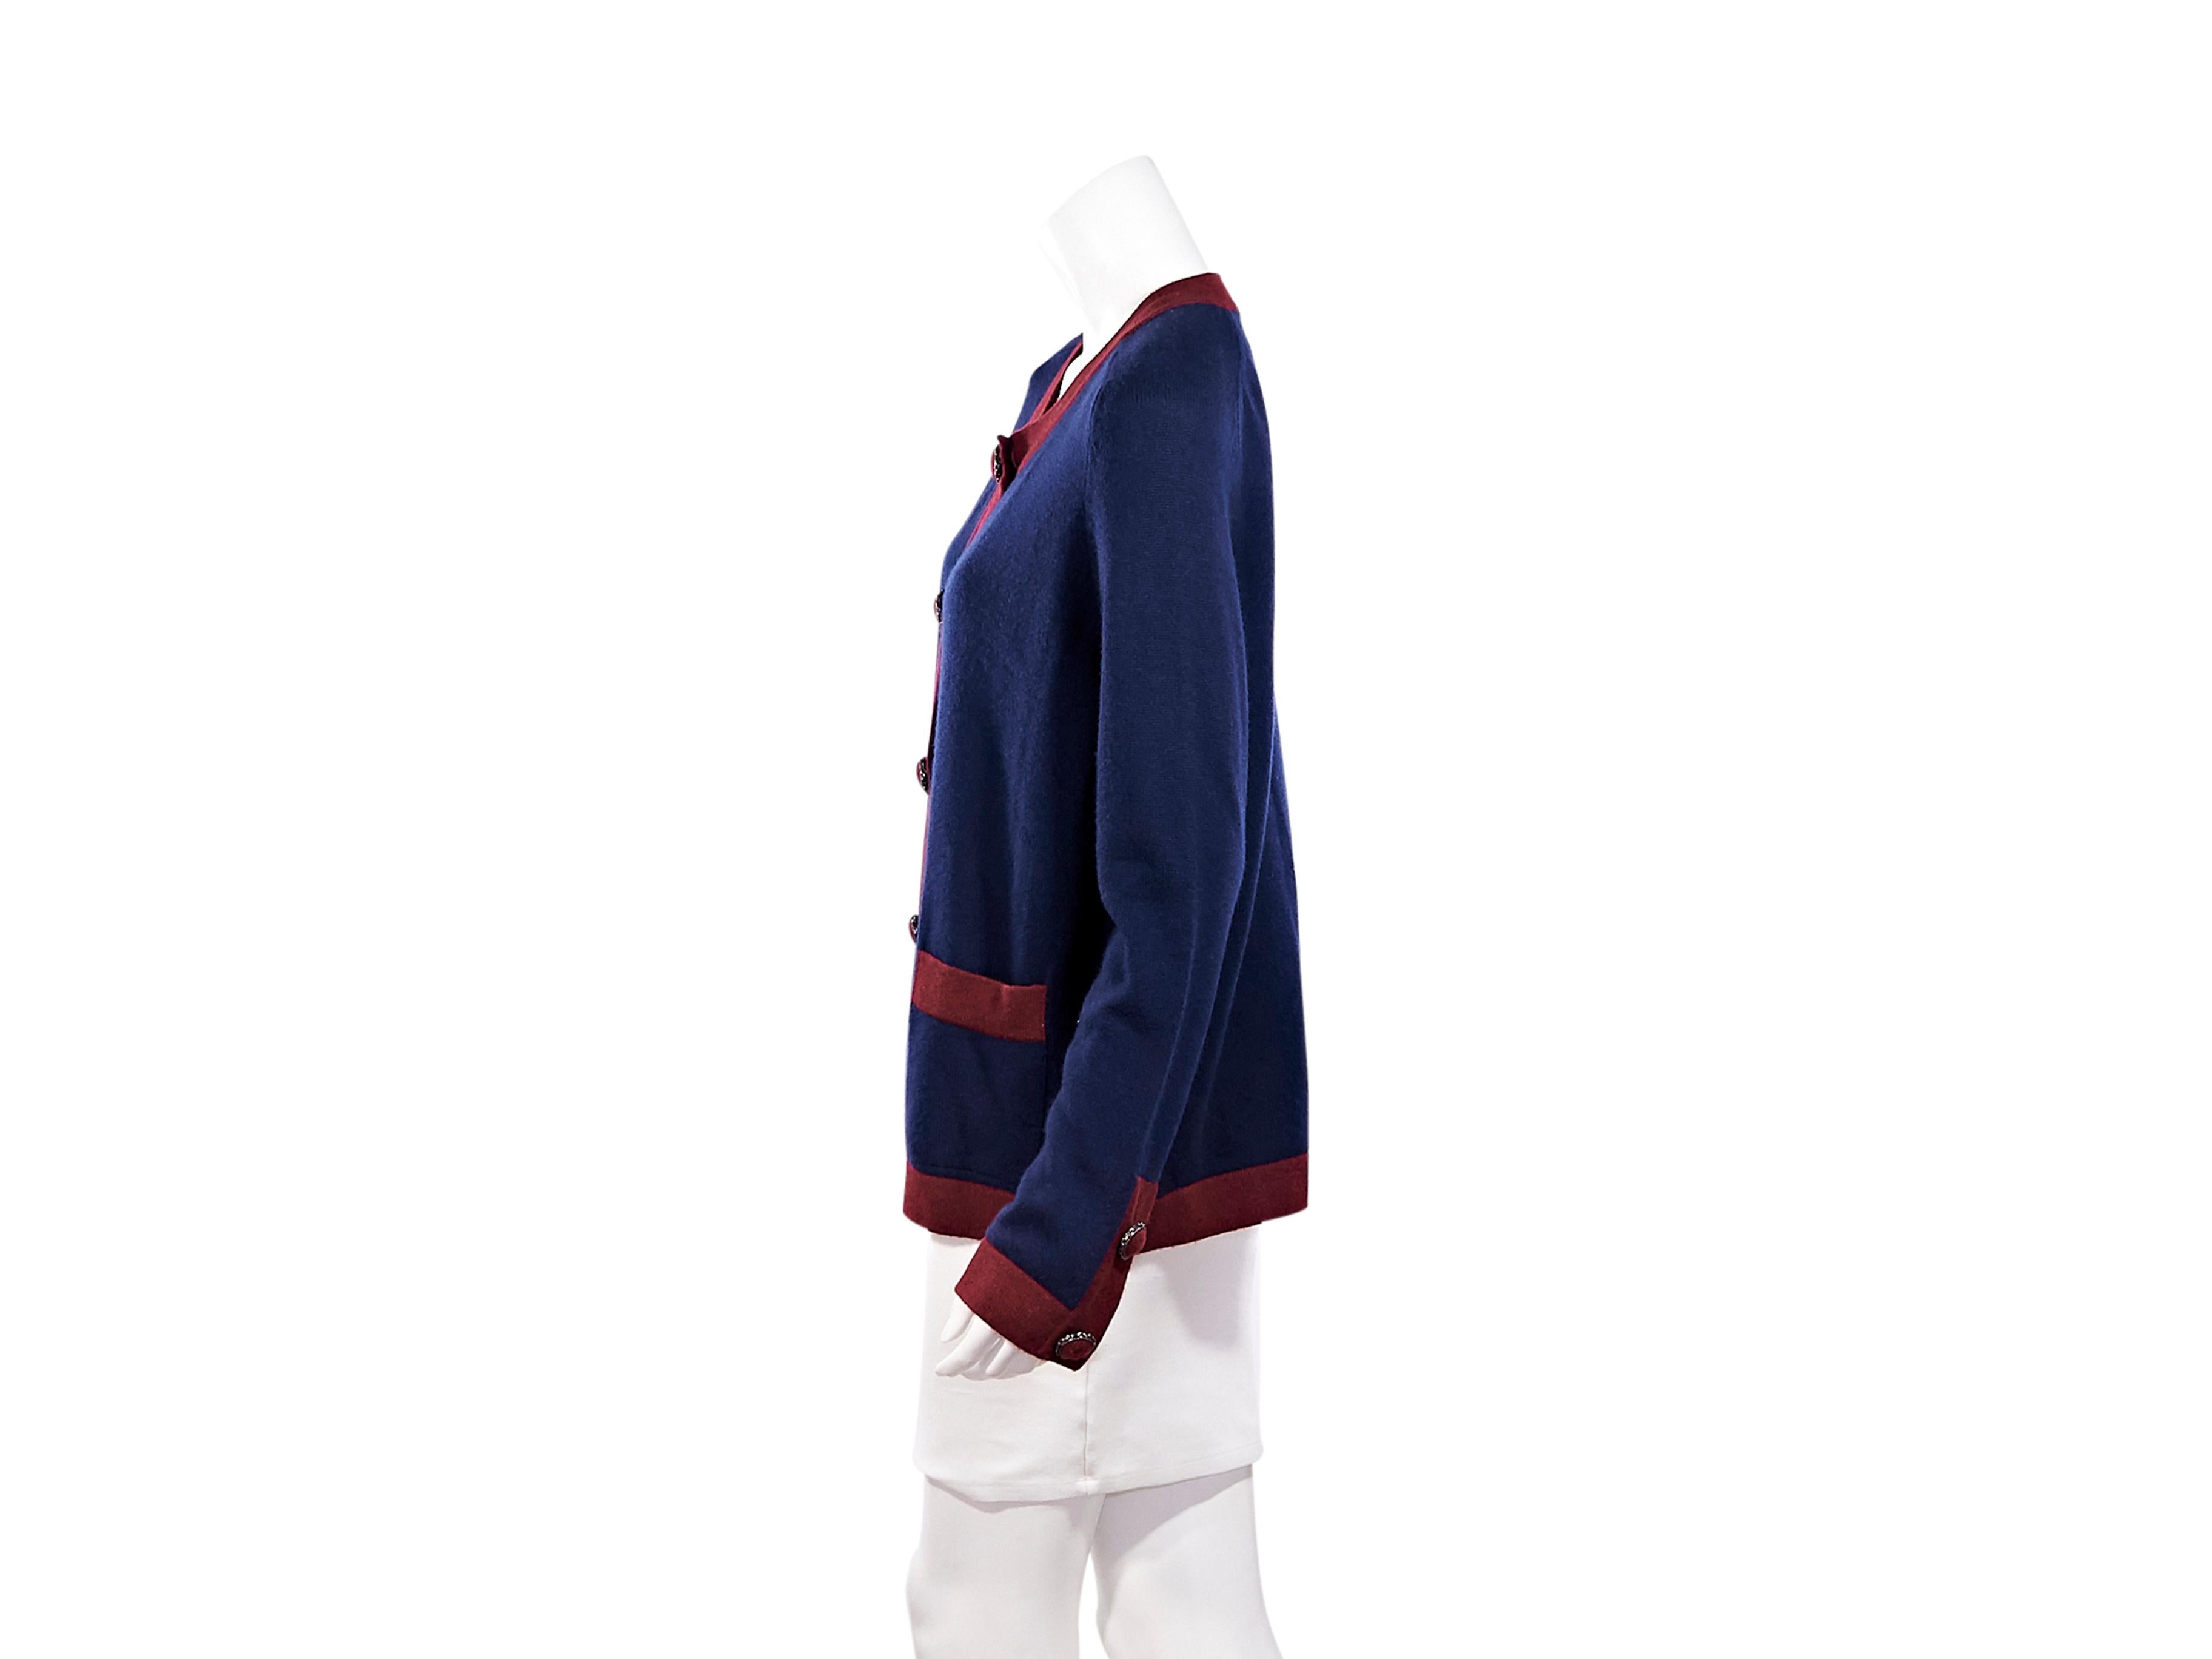 Product details:  Navy blue and red cashmere cardigan by Chanel.  Roundneck.  Long sleeves.  Button-front closure.  Waist patch pockets.  Label size FR 50.  46